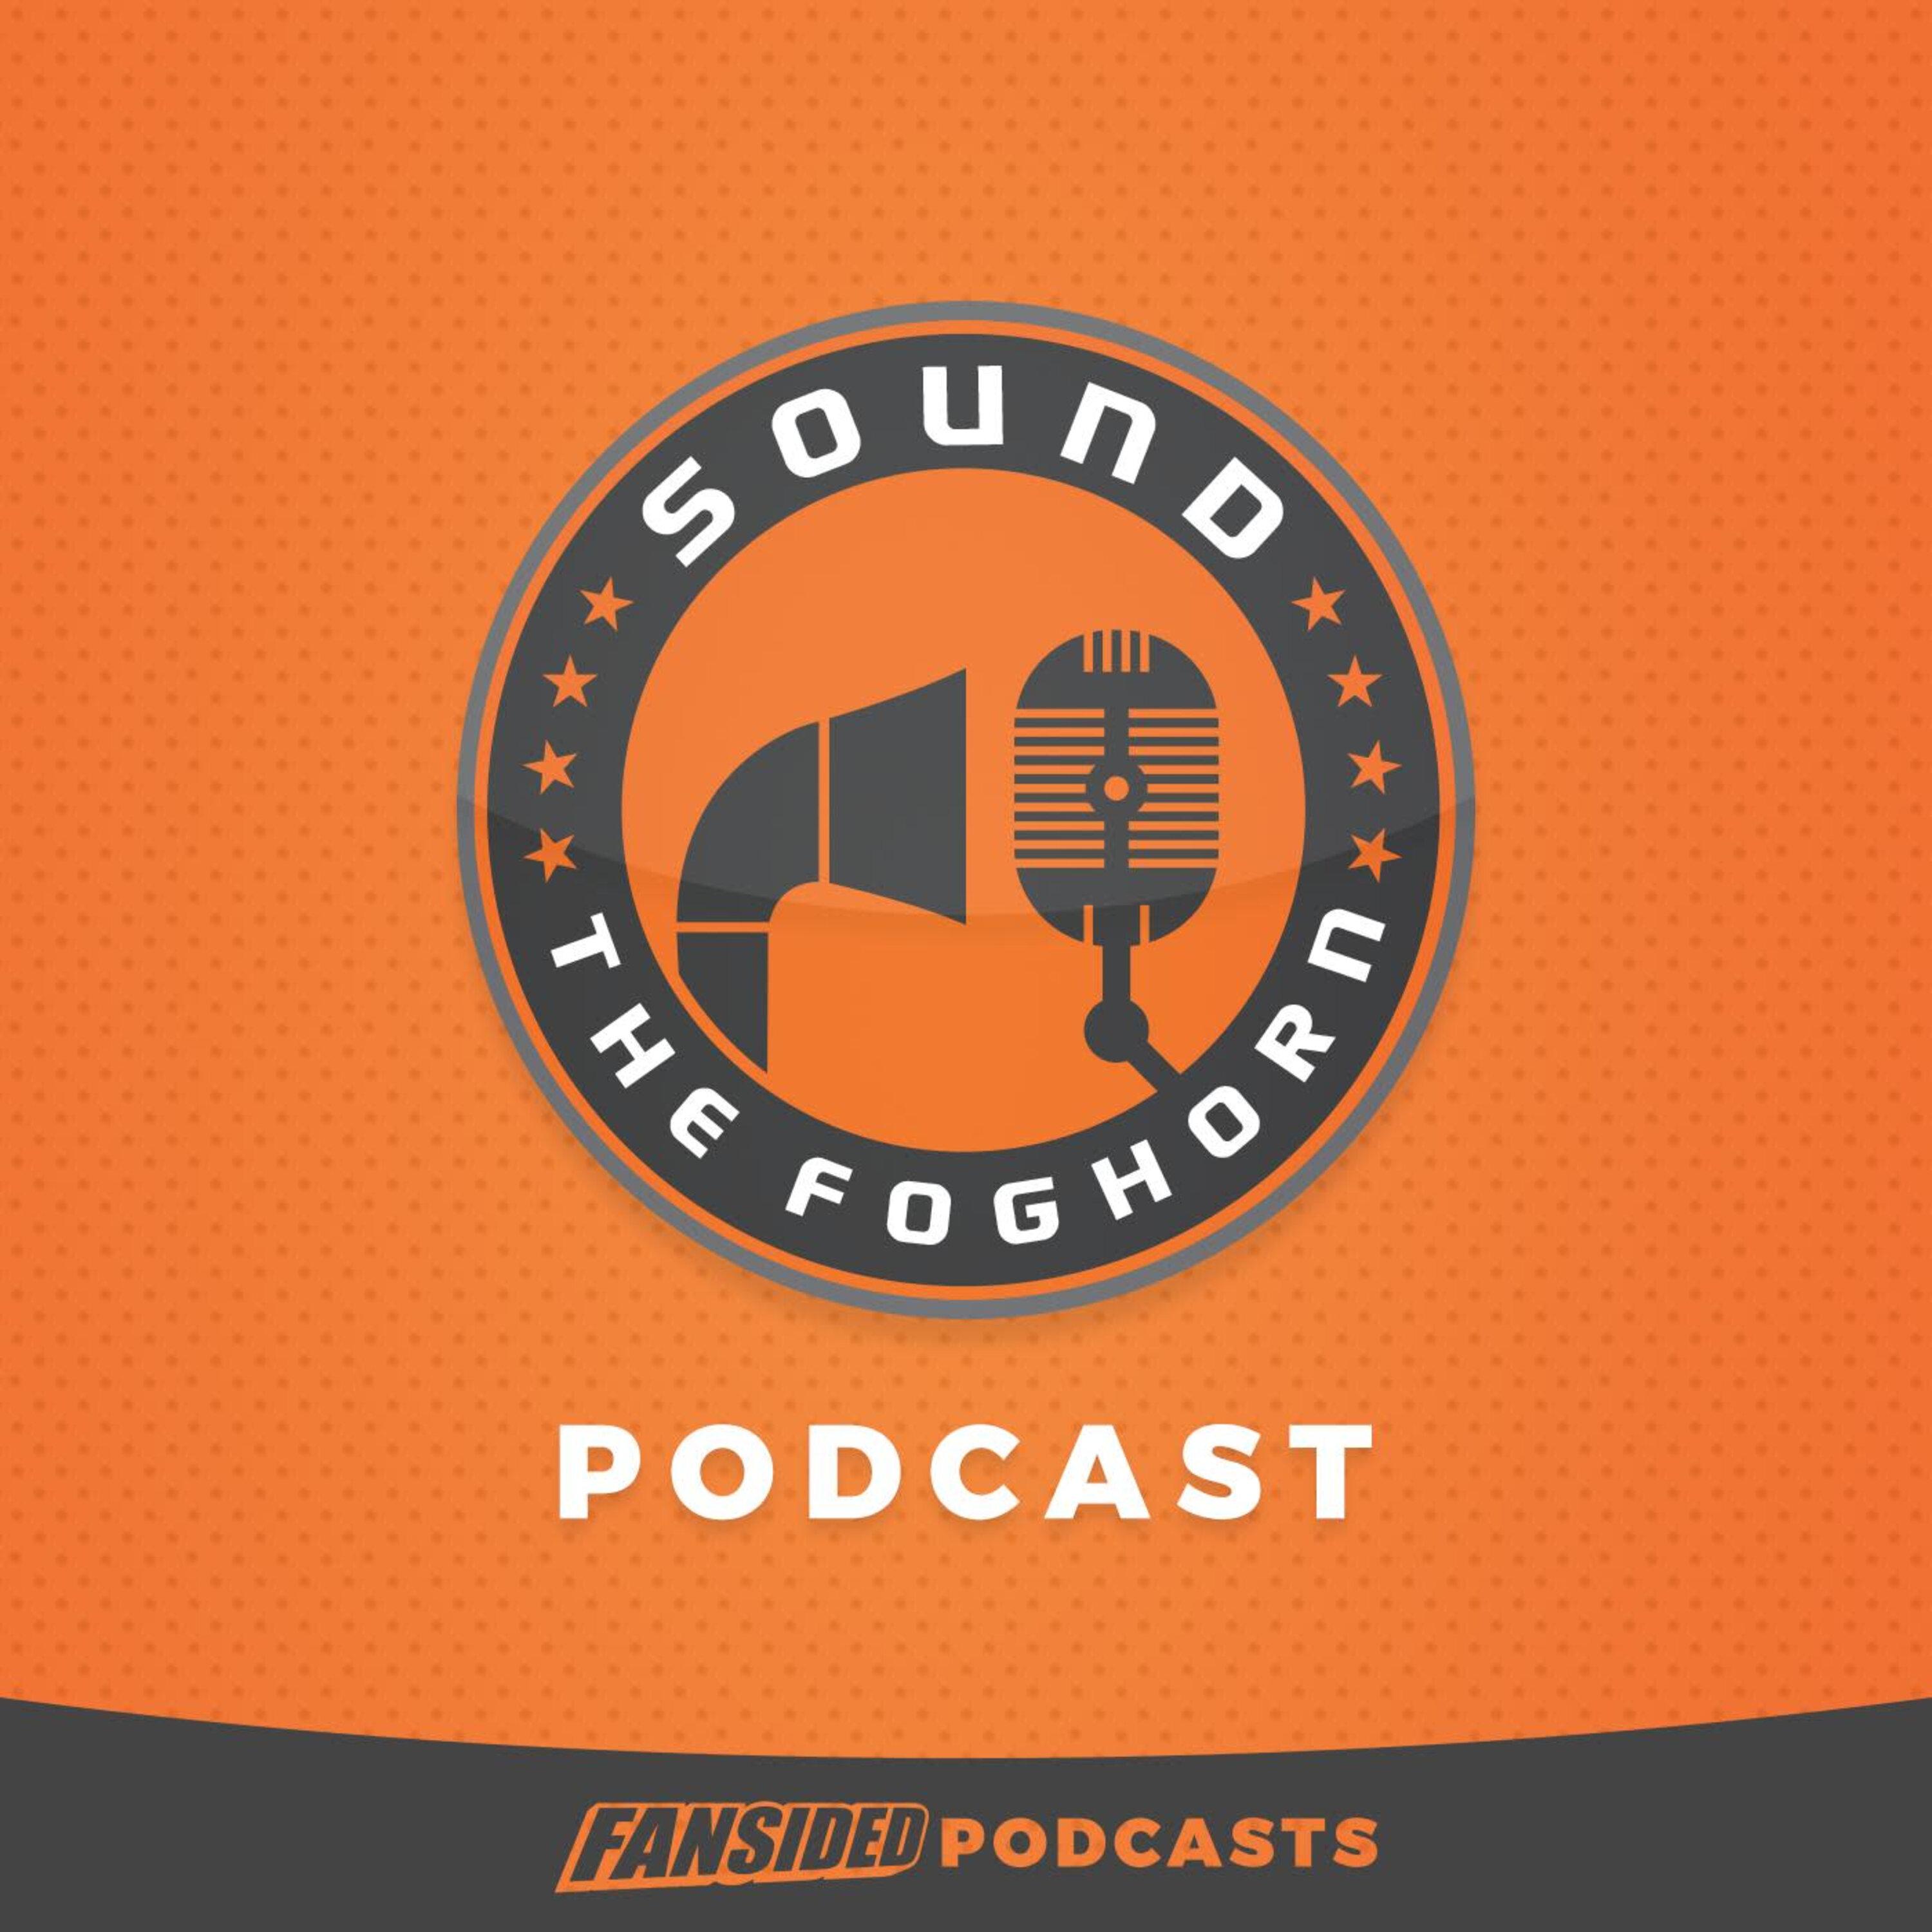 Sound the Foghorn Podcast on the SF Giants